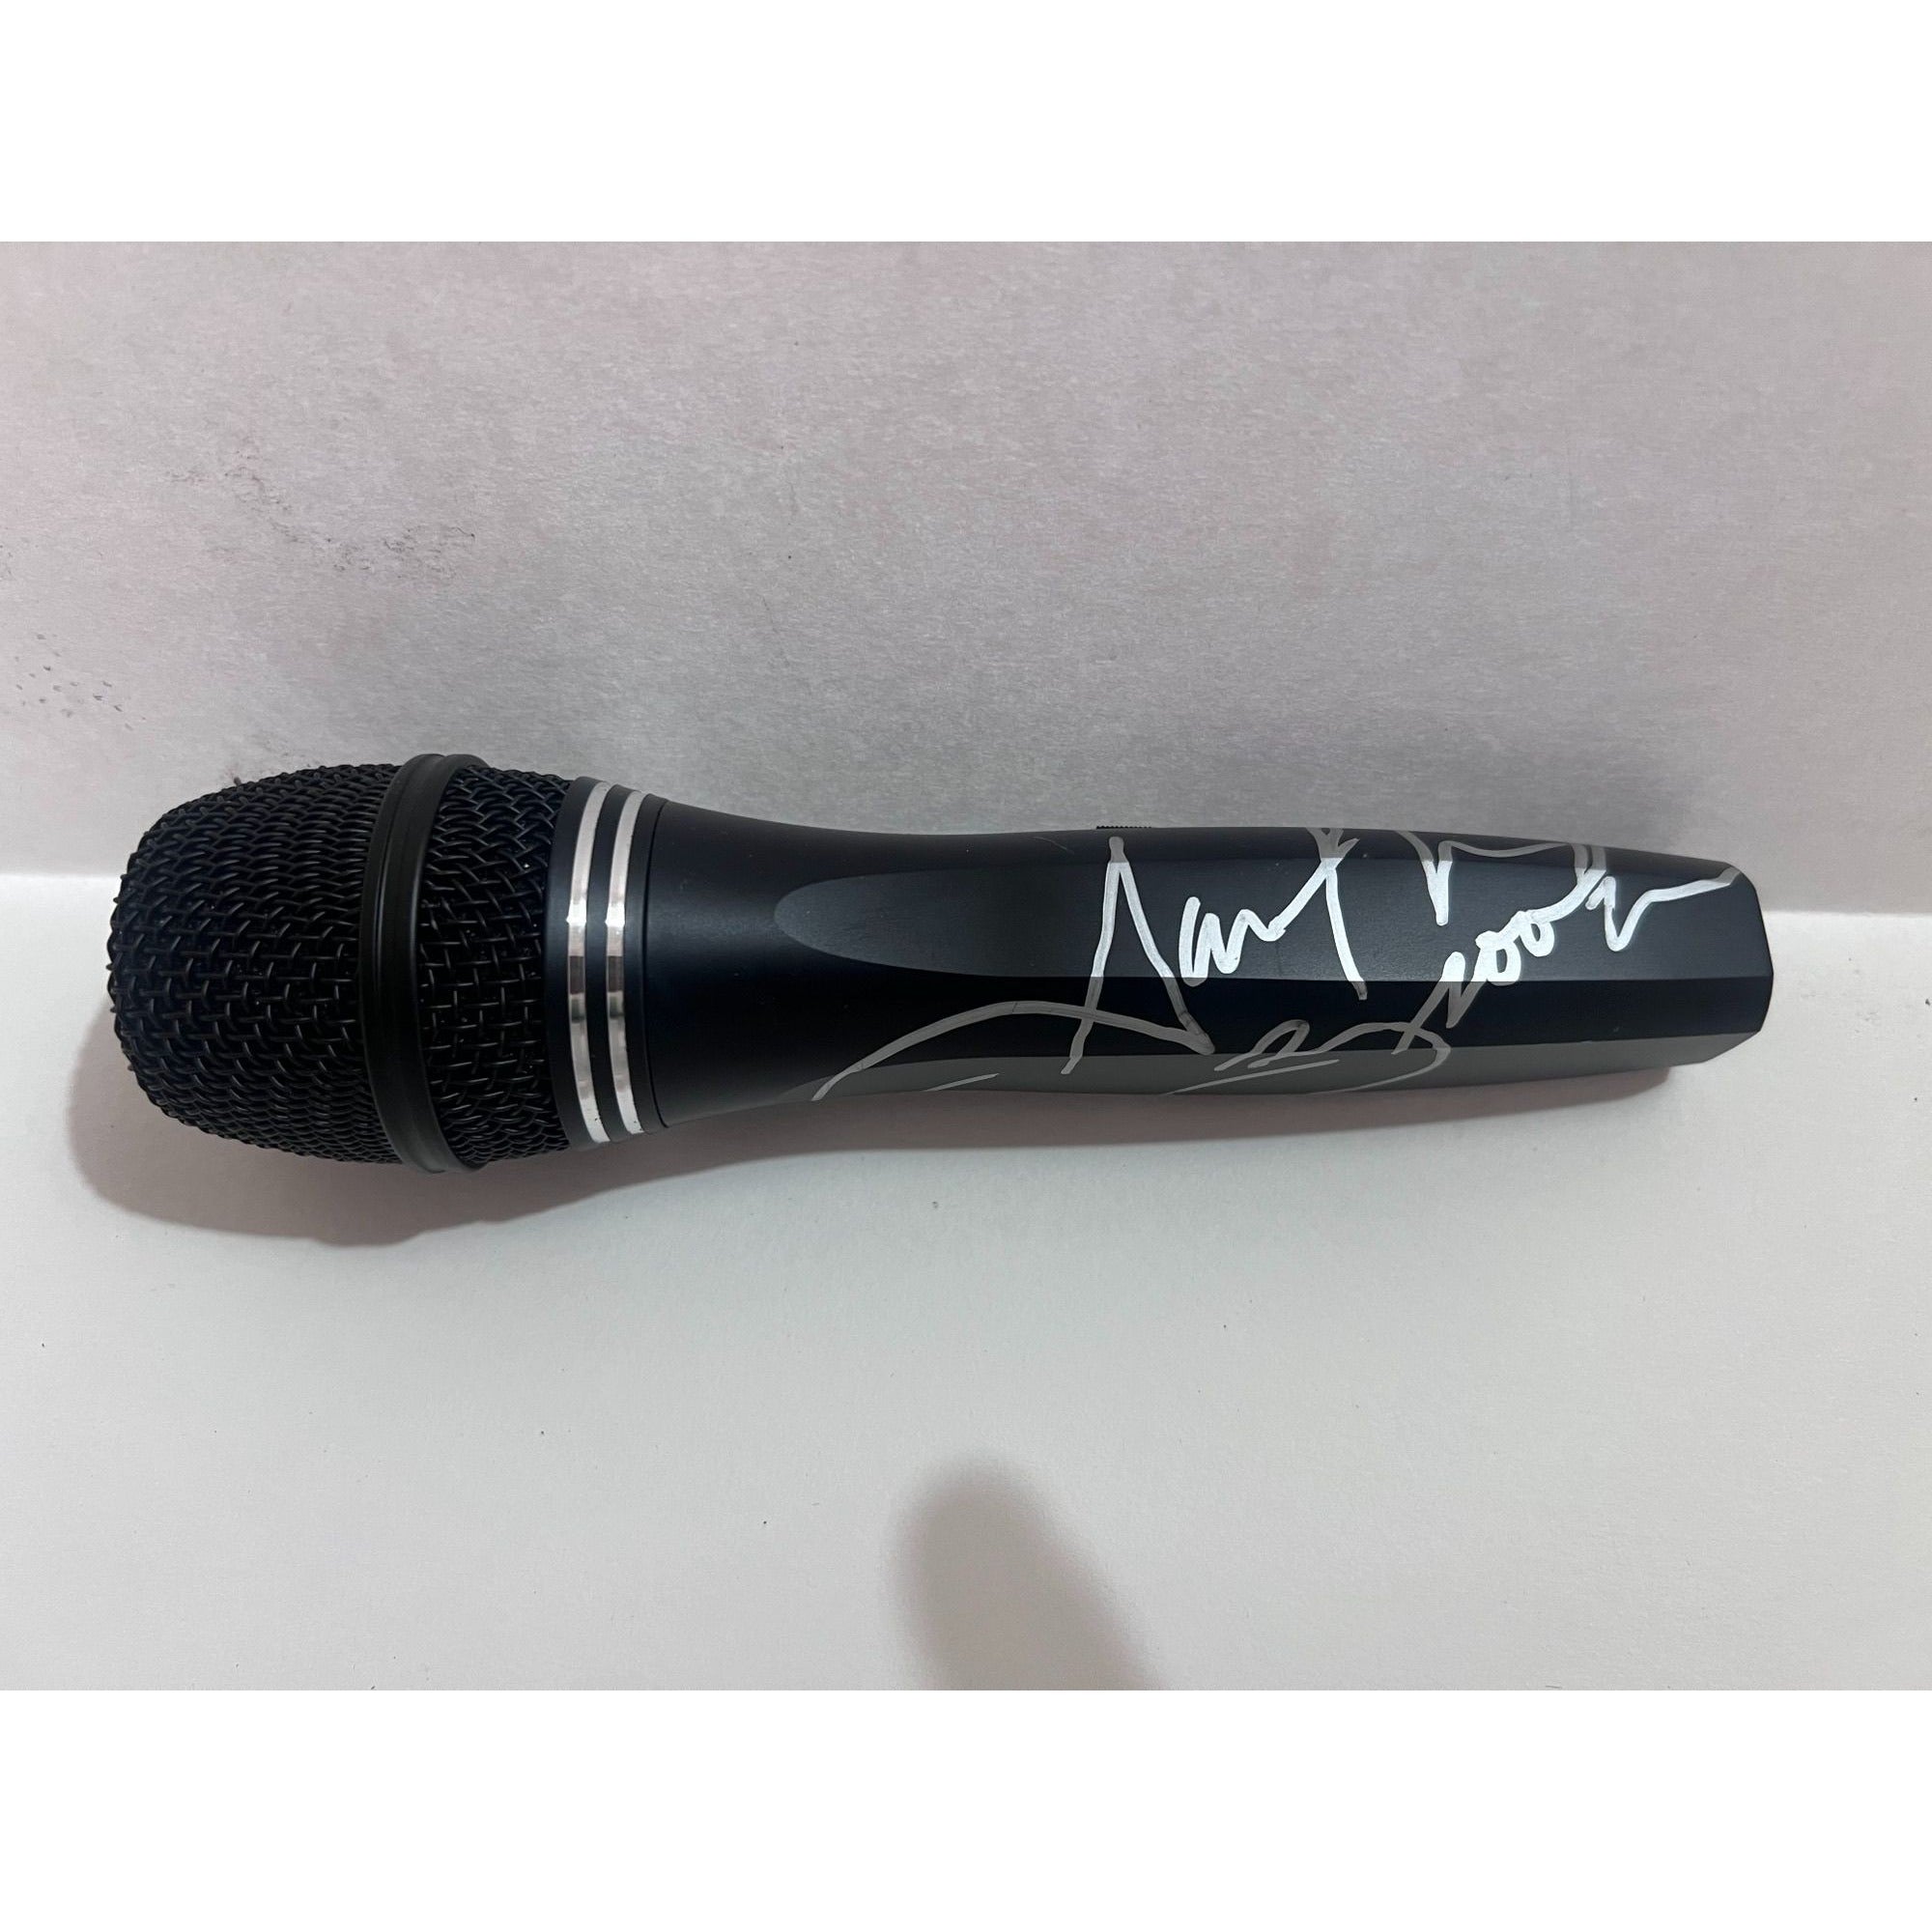 Garth Brooks microphone signed with proof